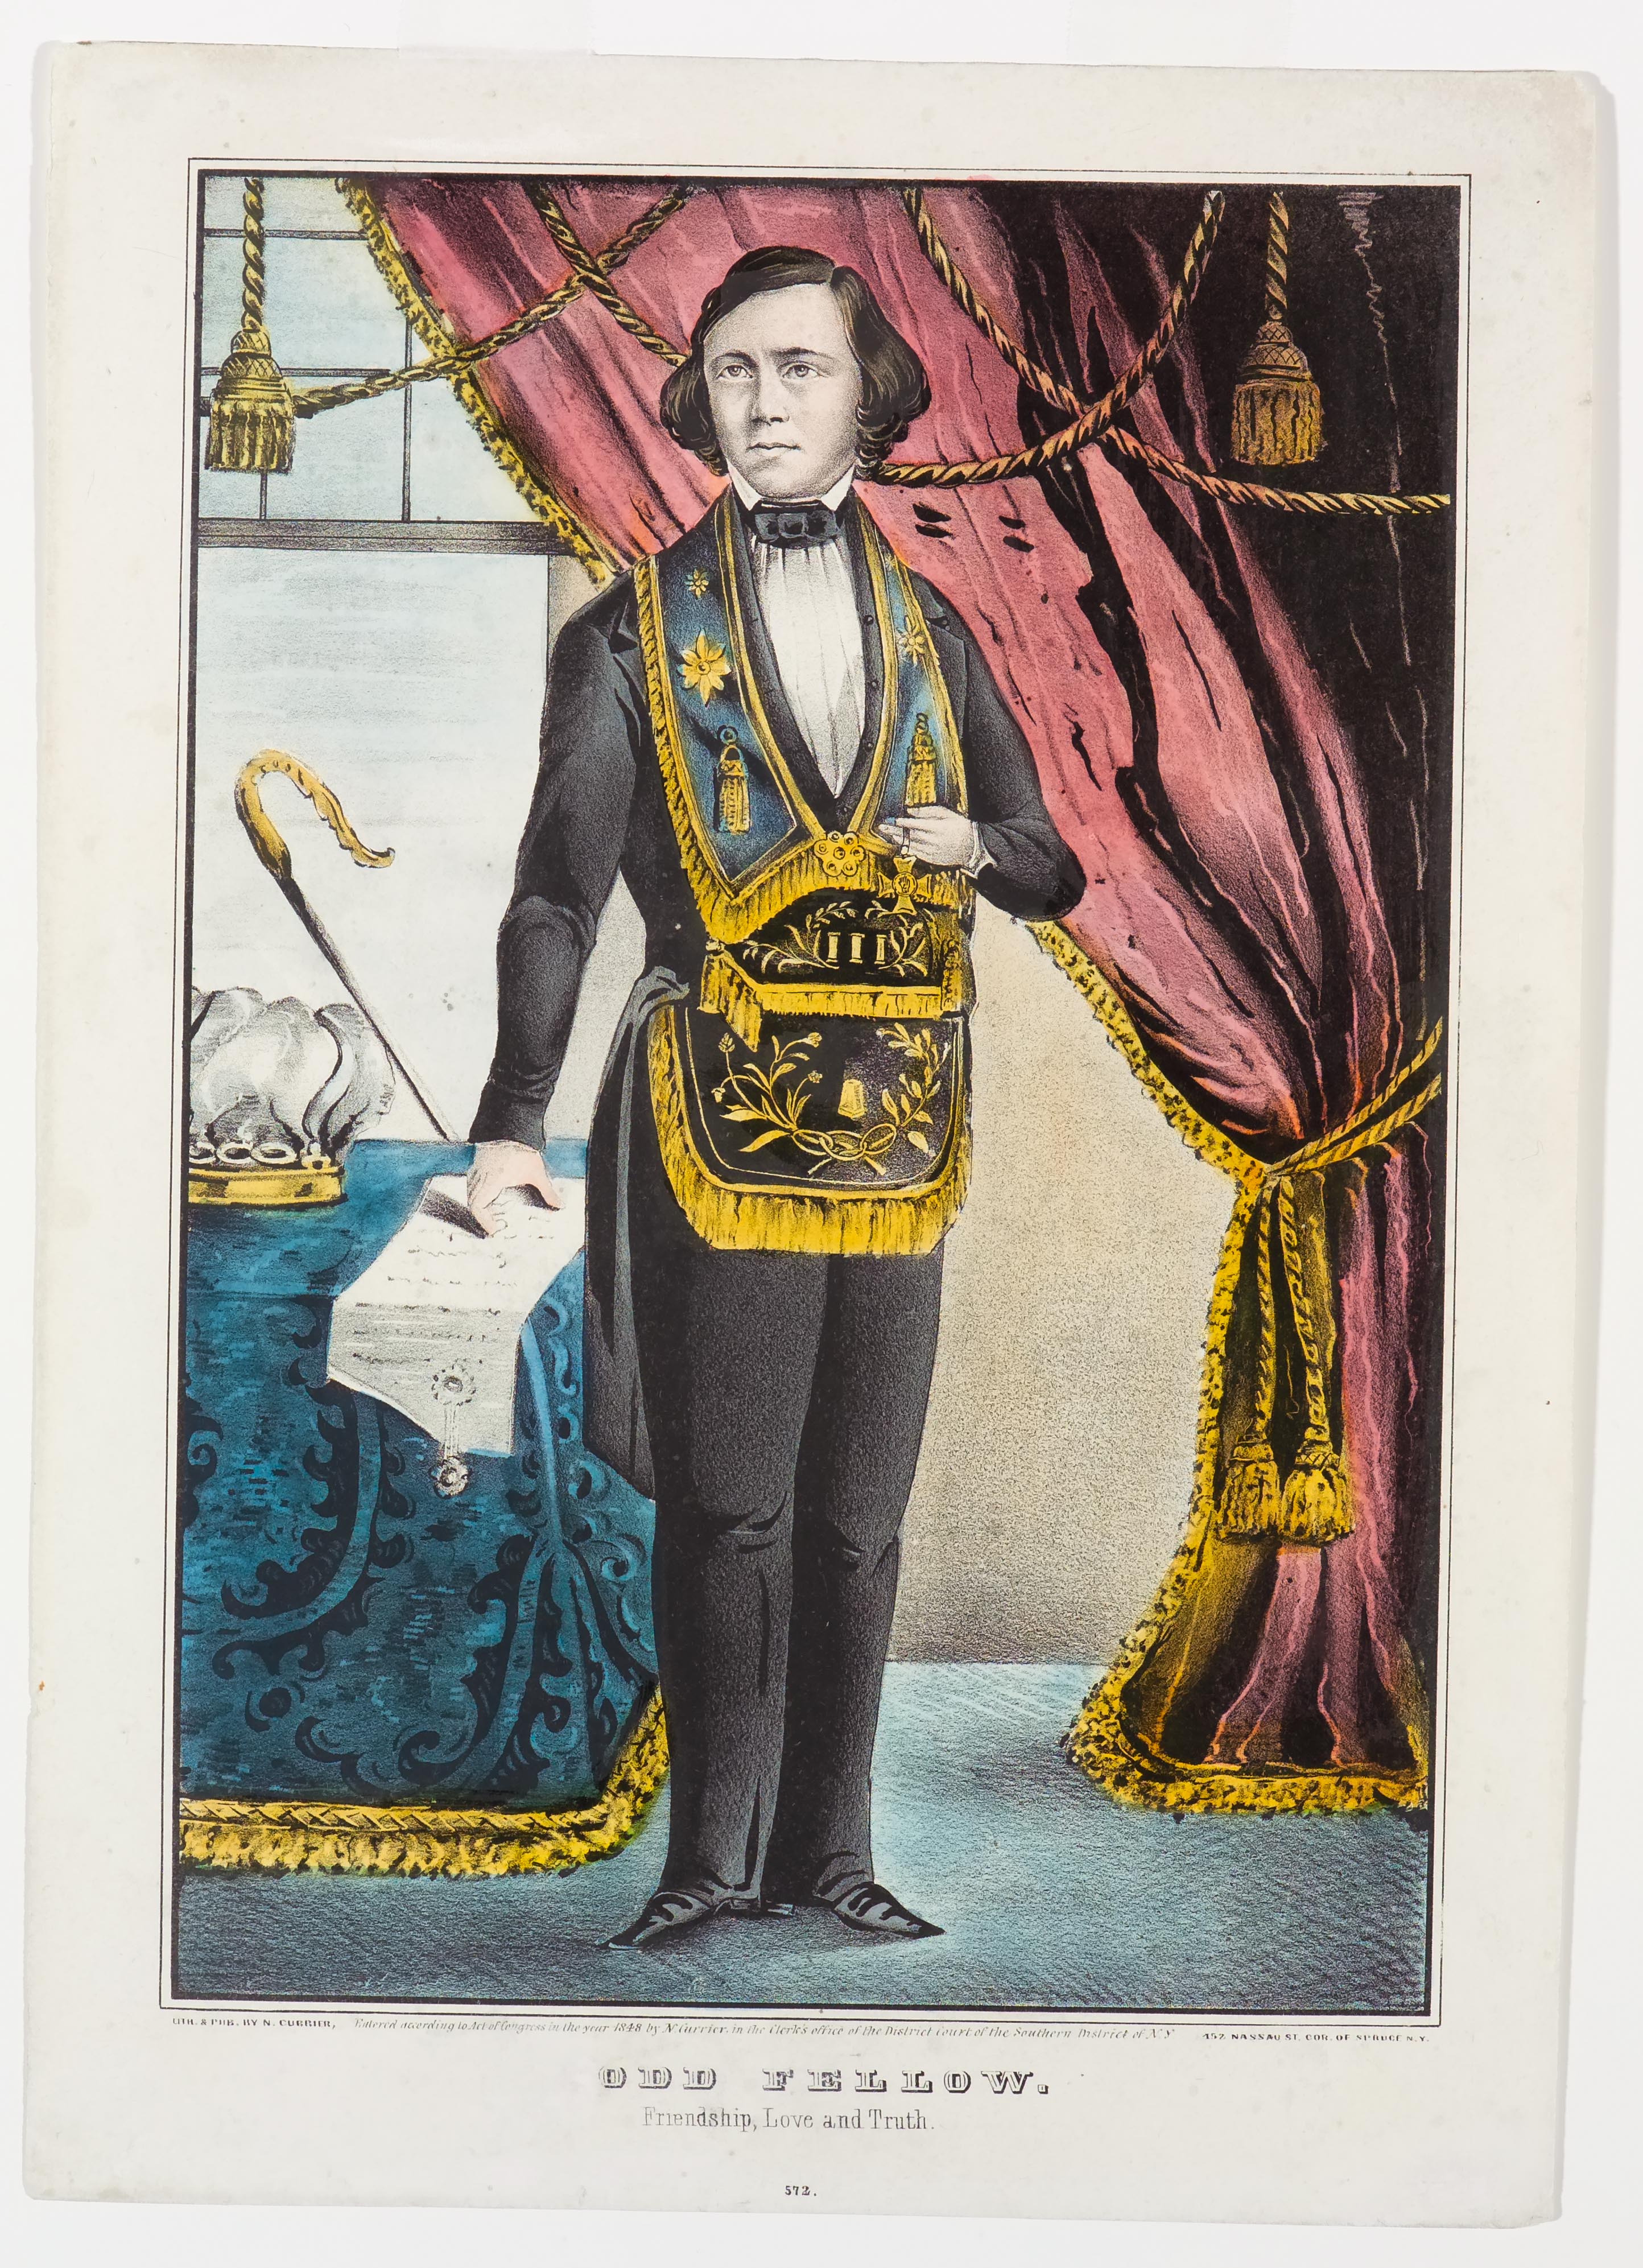 Man with suit over which he's wearing a decorative apron